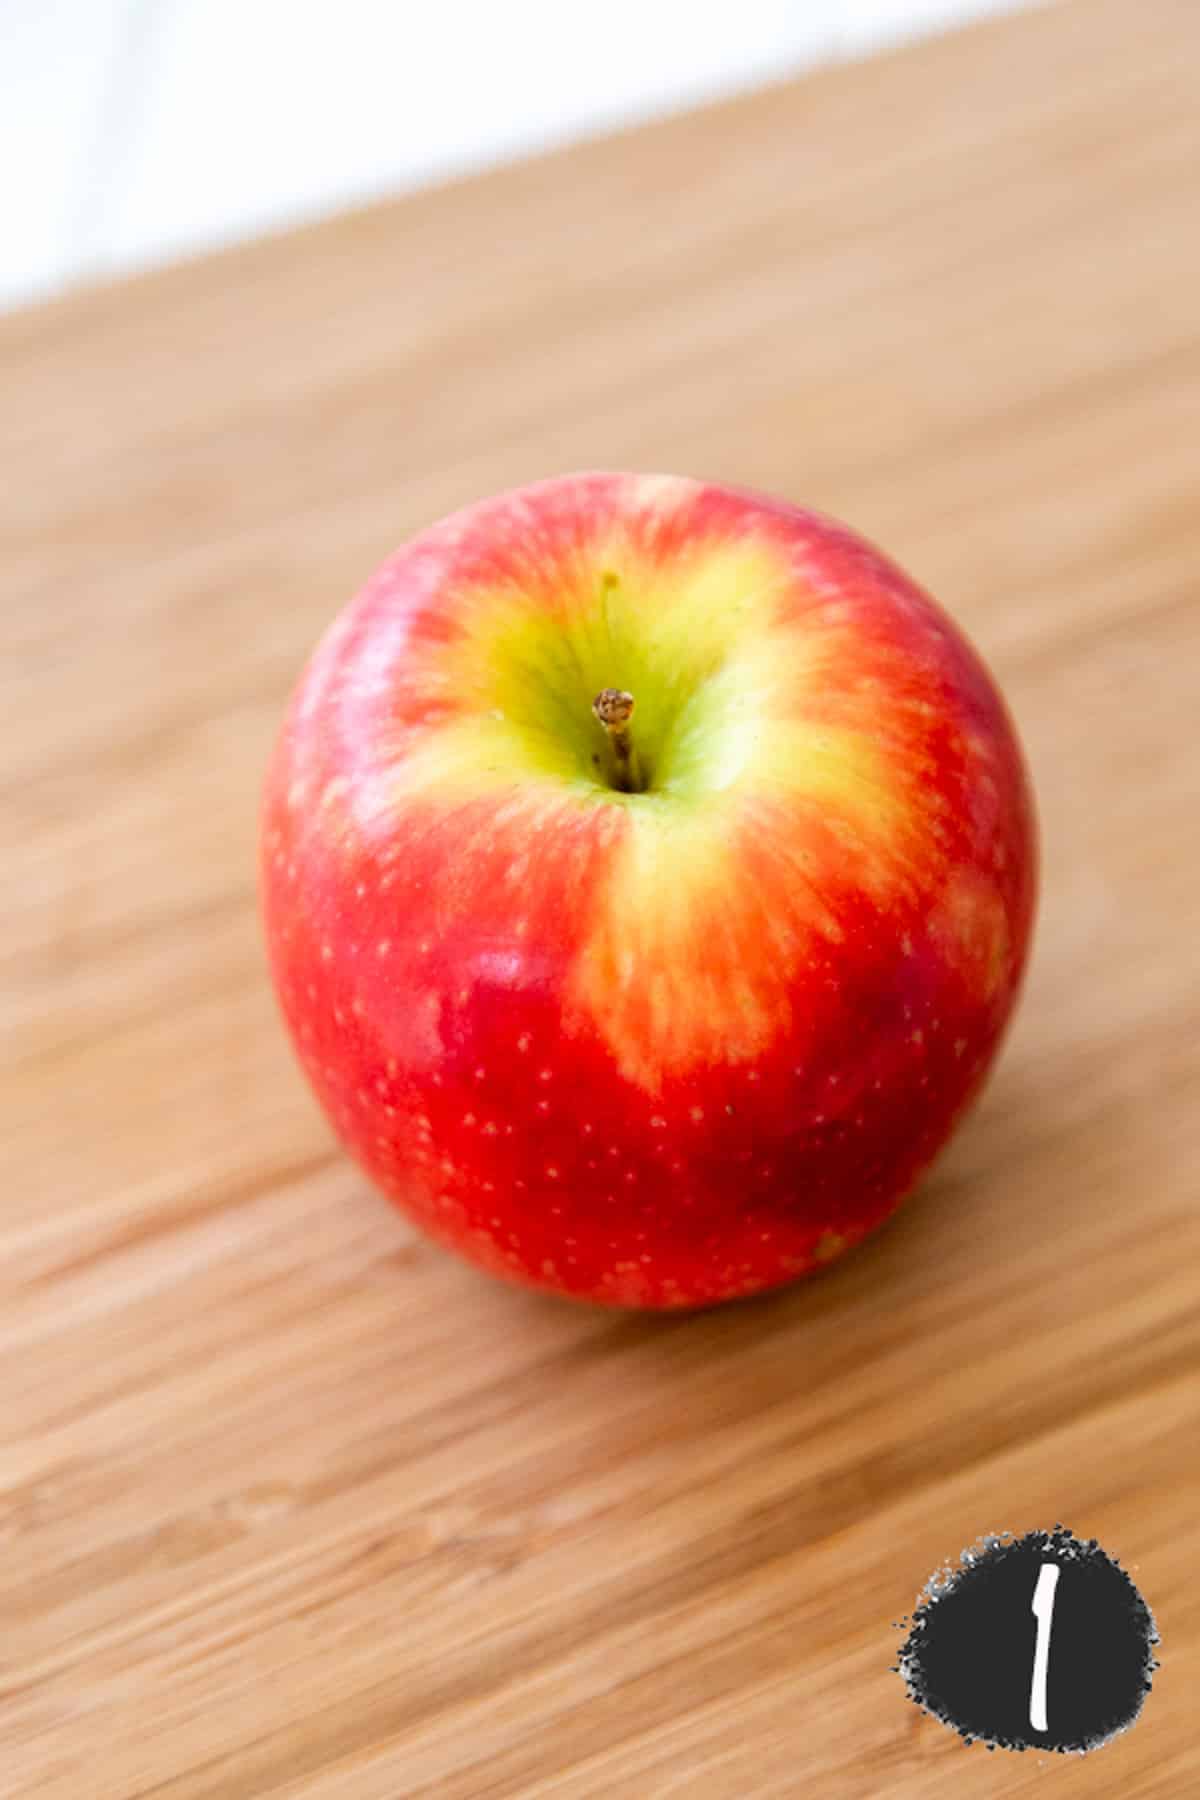 A red apple on a wooden board.